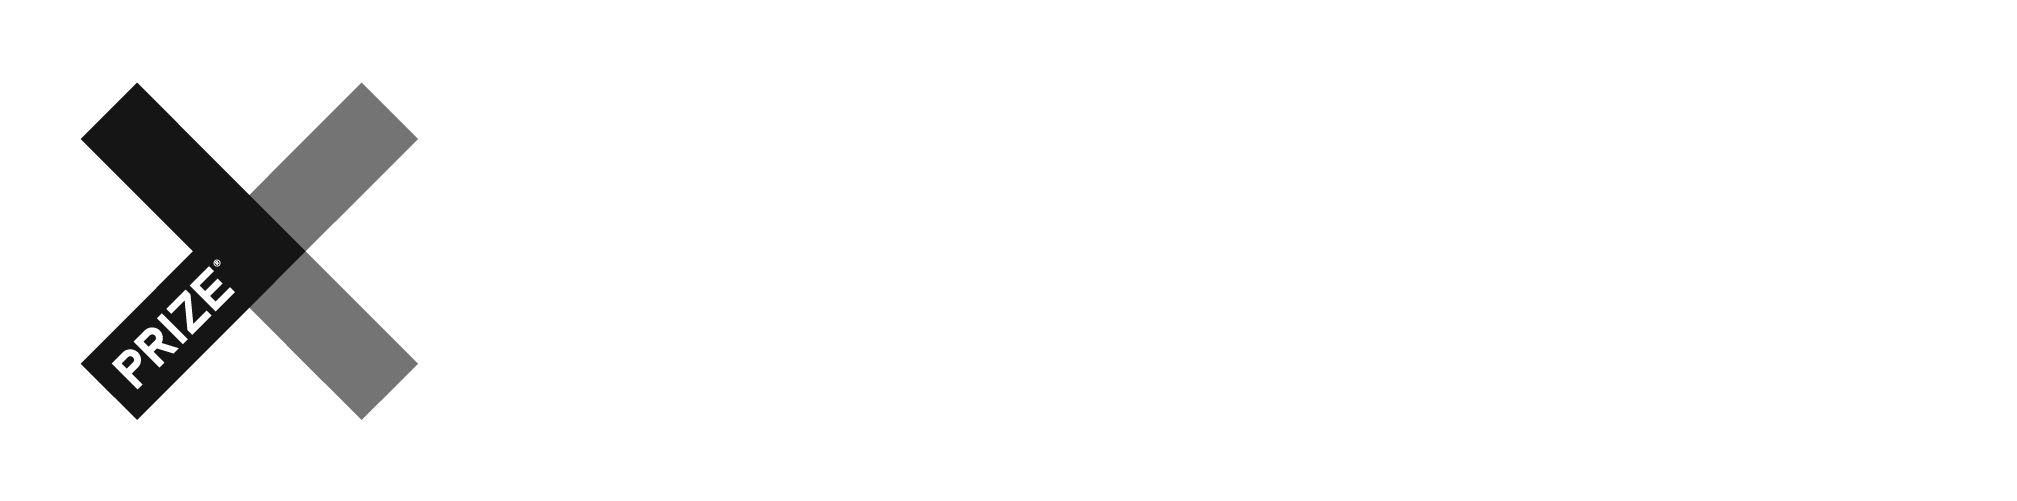 XPRIZE Racial Equity Alliance